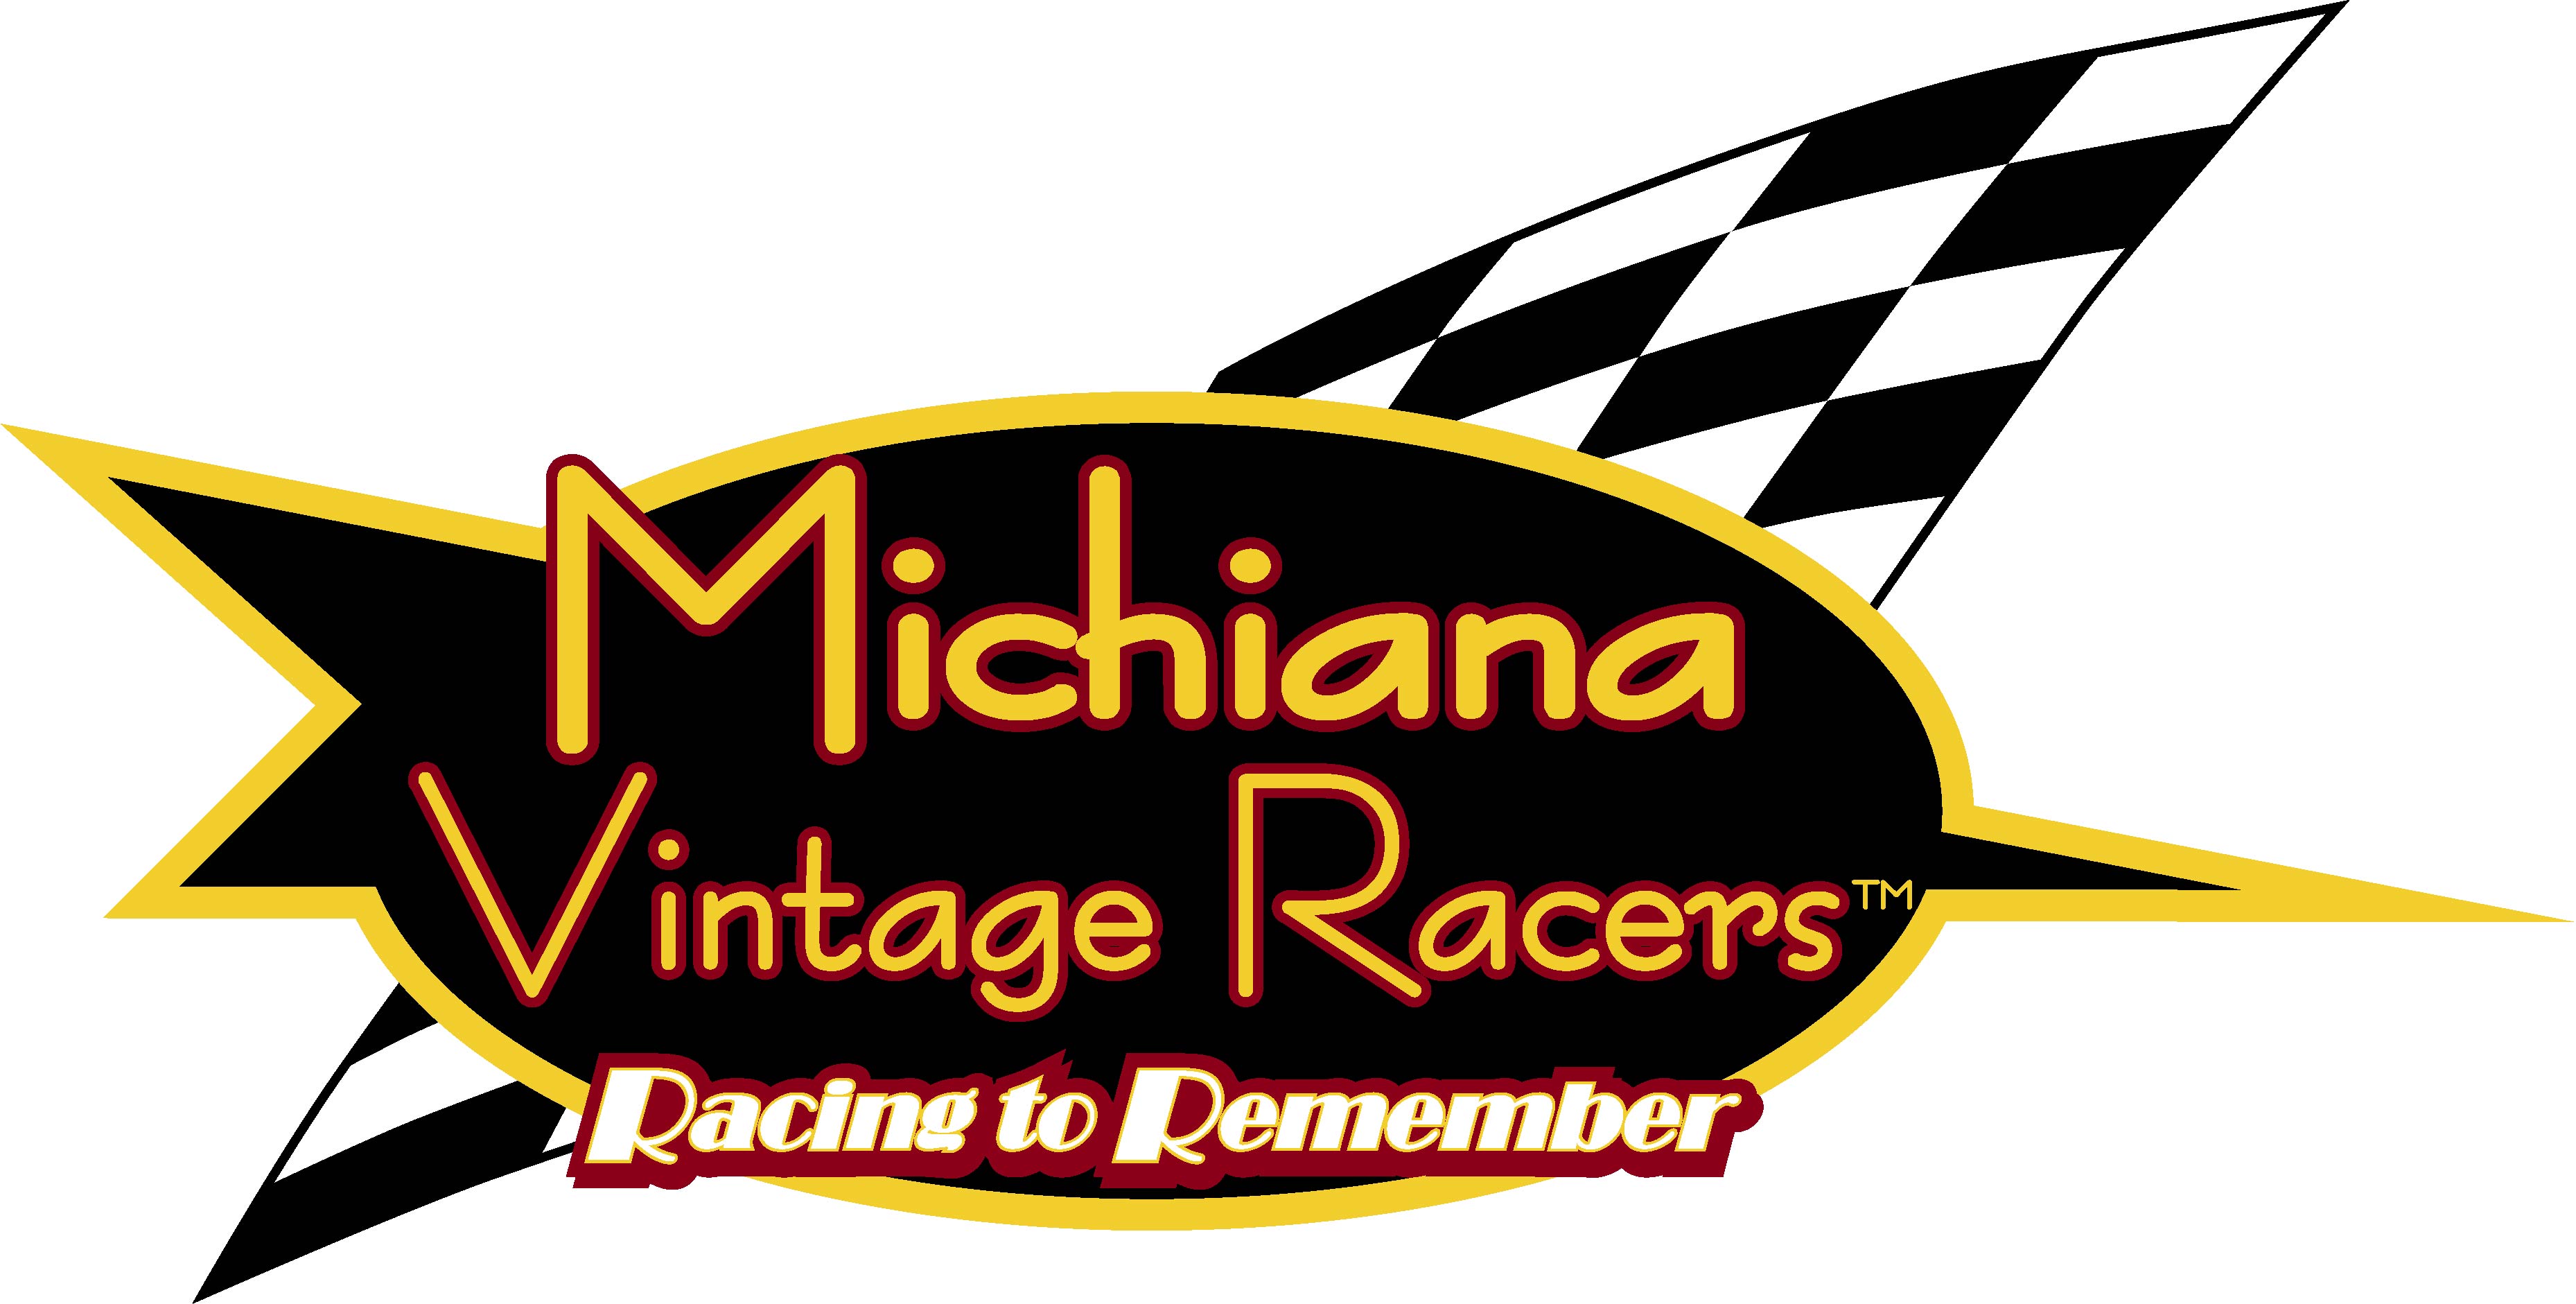 Michiana Vintage Racers-Racing to Remember